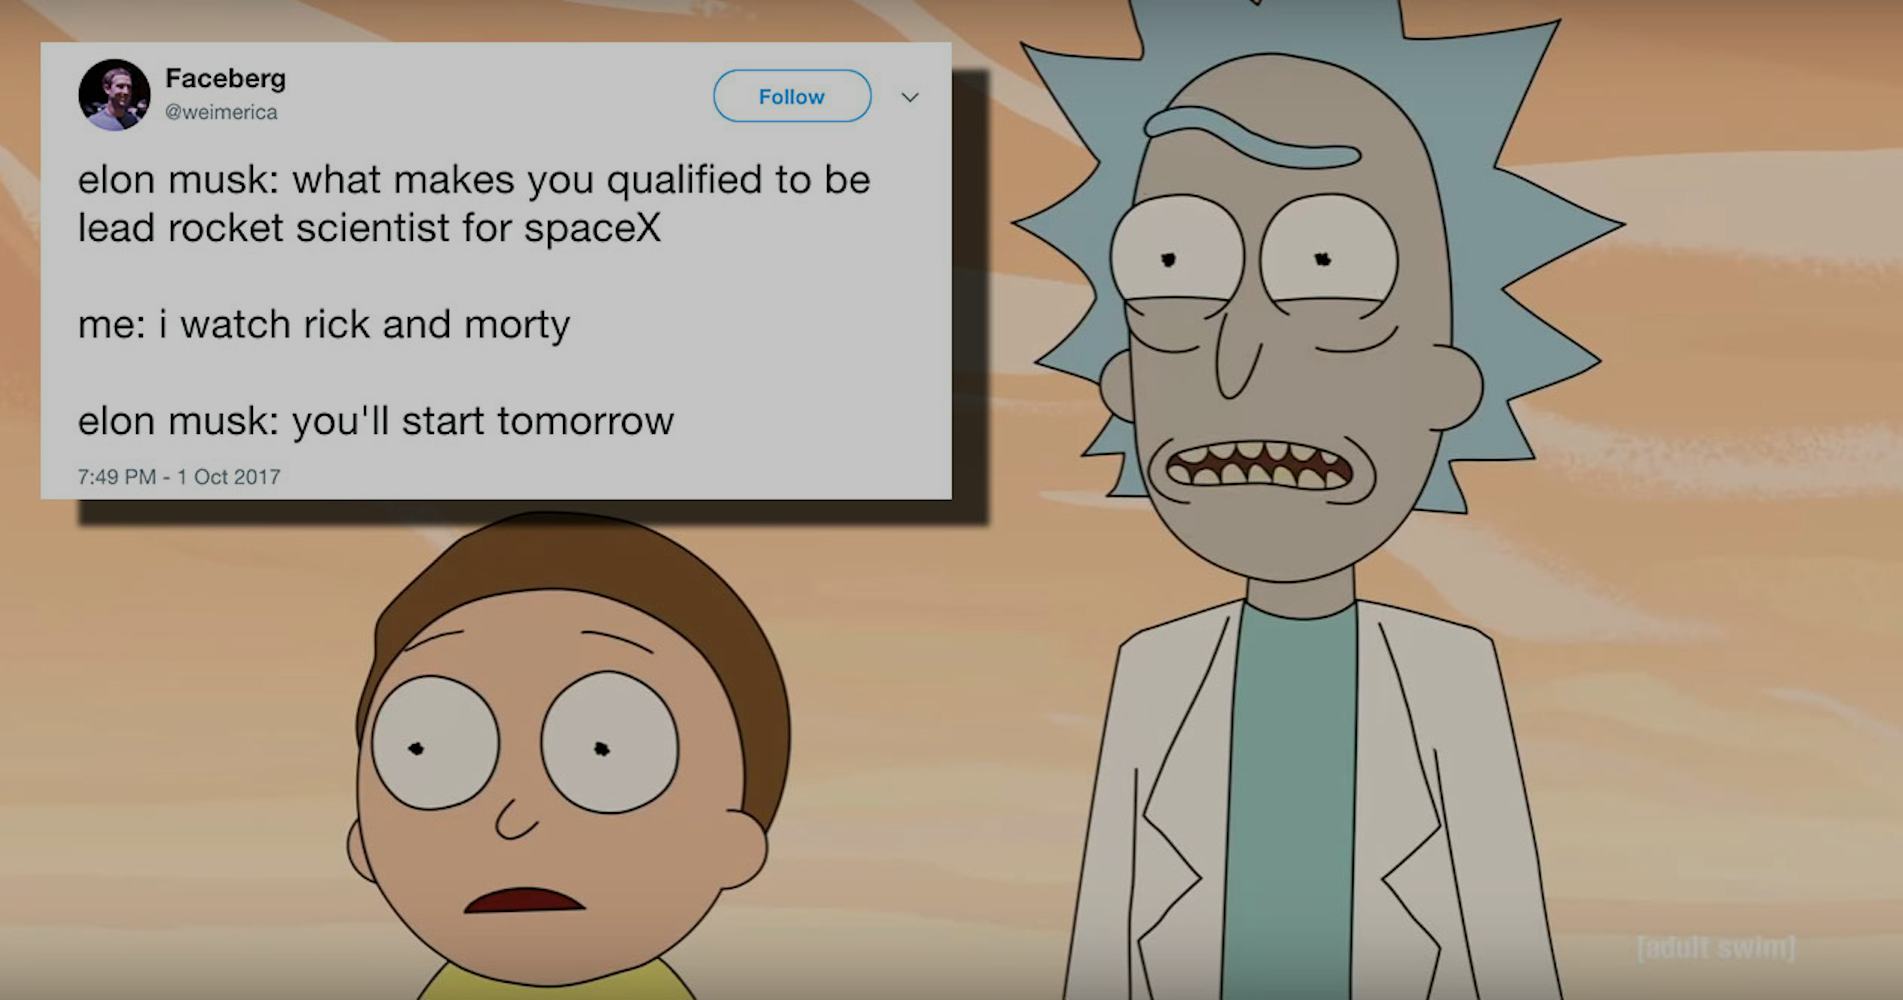 Rick And Morty Memes Make Fun Of The Shows Fans With High Iqs